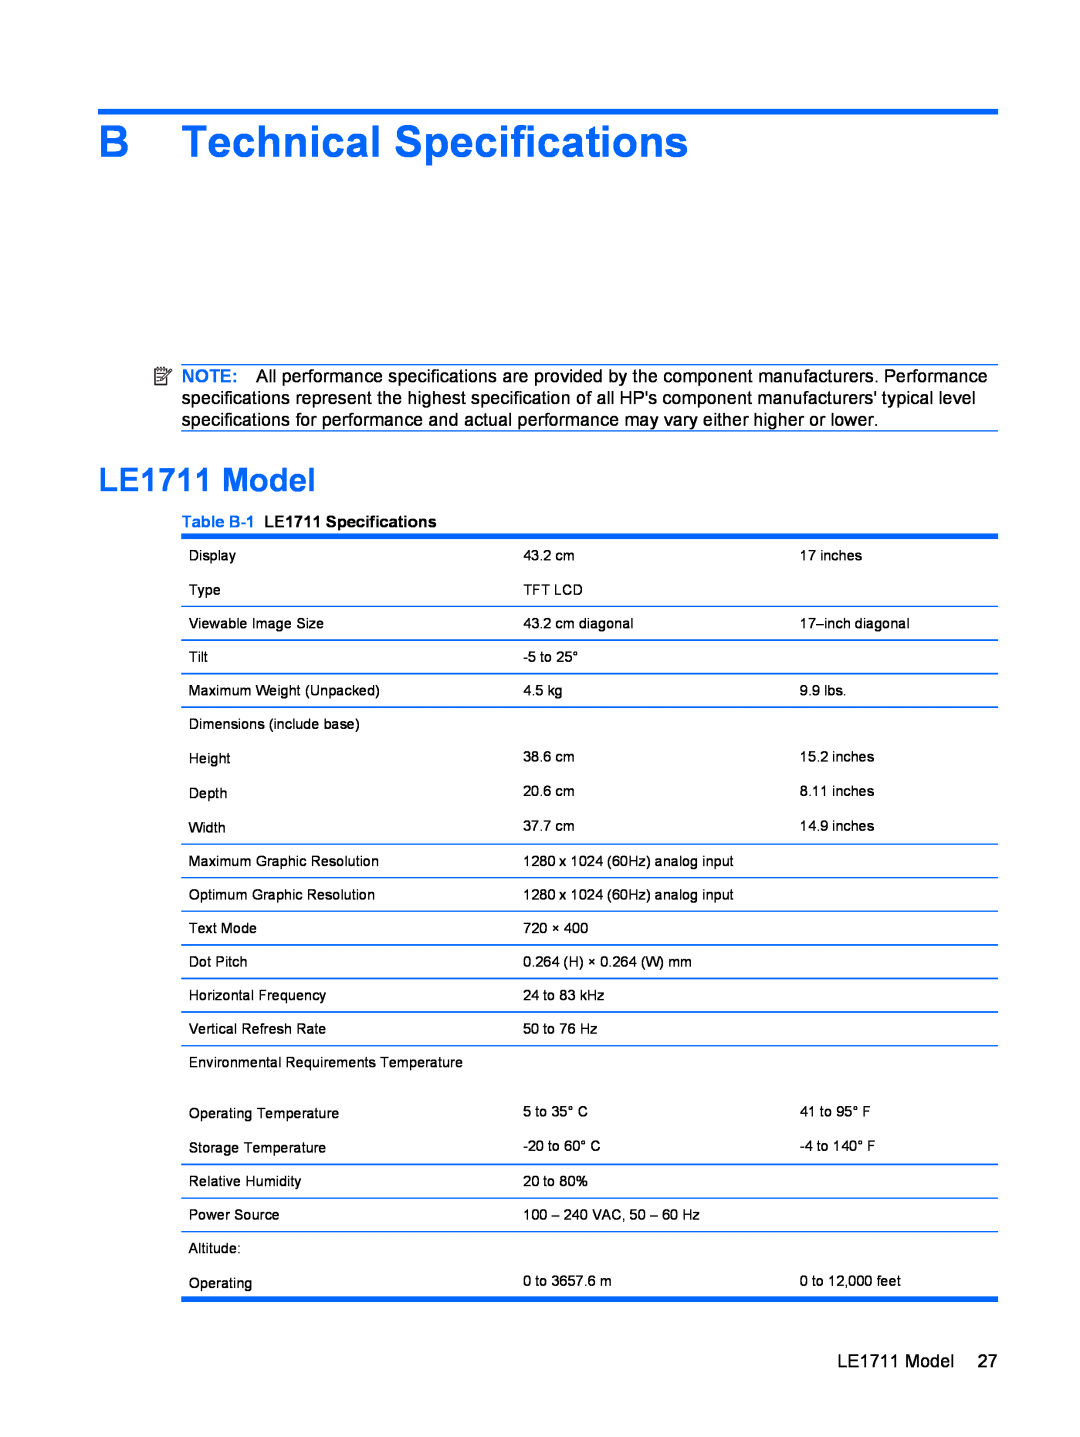 HP LE1711 17-inch manual B Technical Specifications, LE1711 Model, Table B-1 LE1711 Specifications 